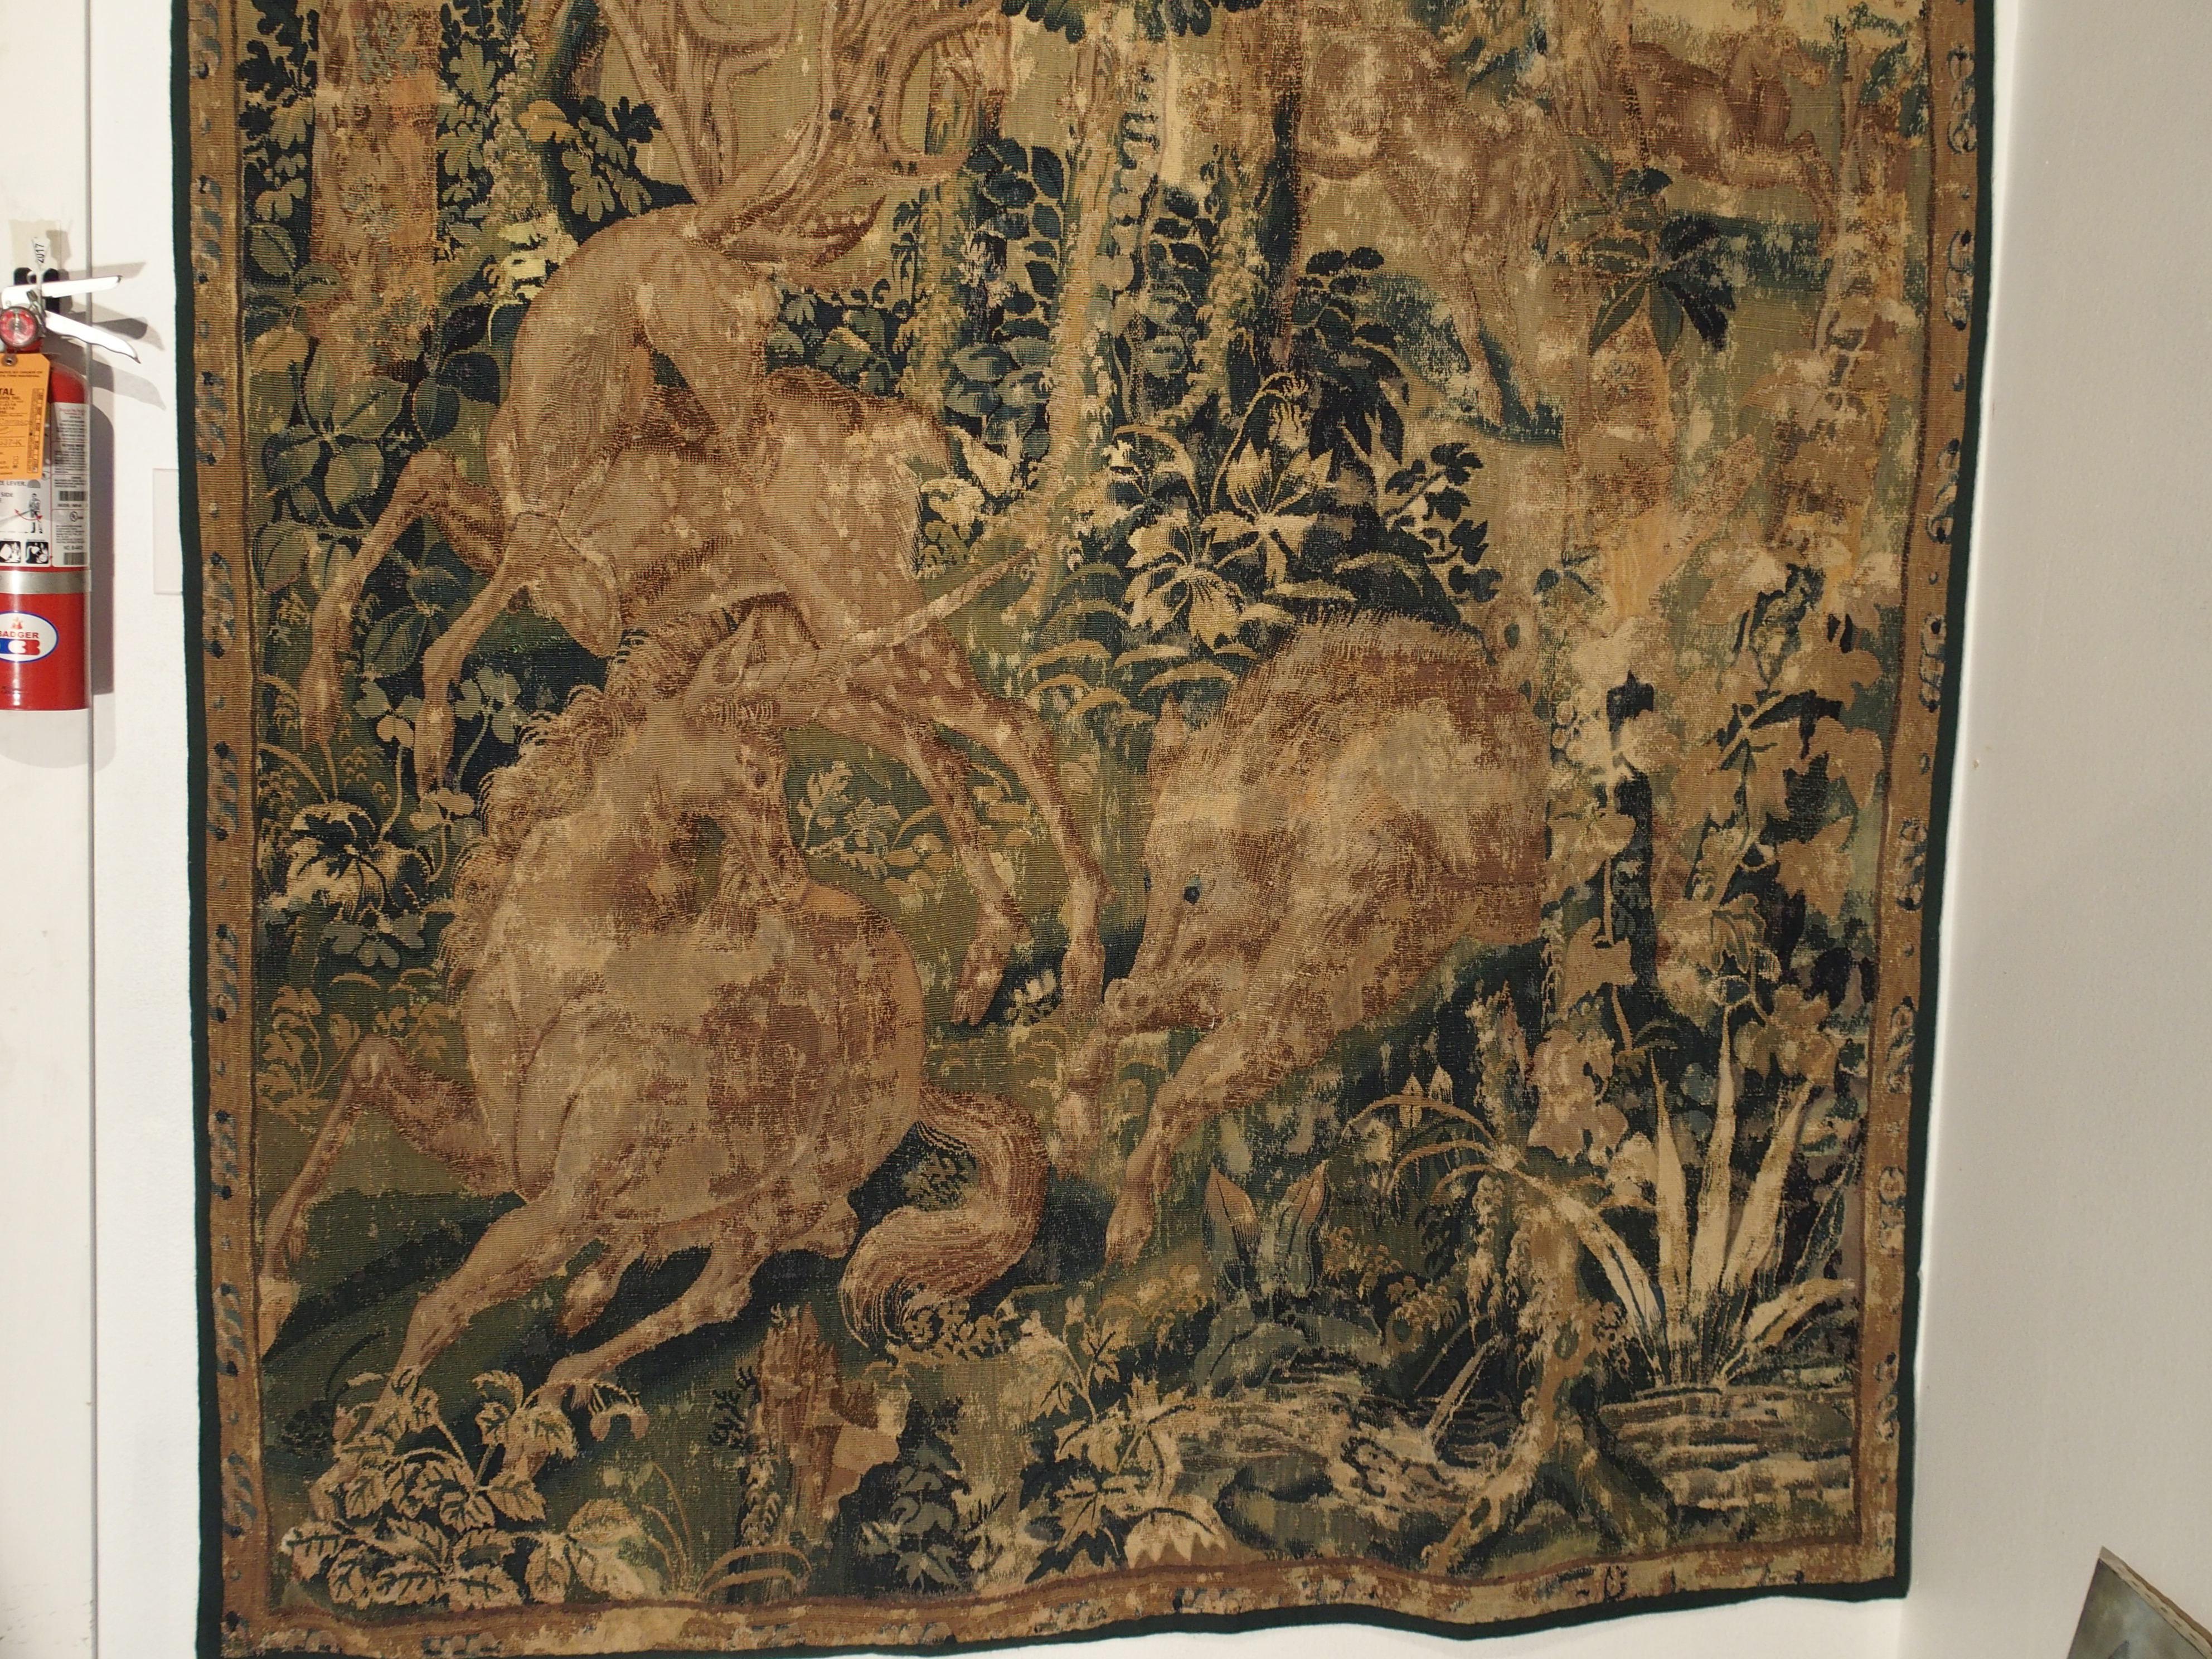 Hand-Woven Late 16th Century Flemish Game Park Tapestry with Unicorn, Stag, and Boar